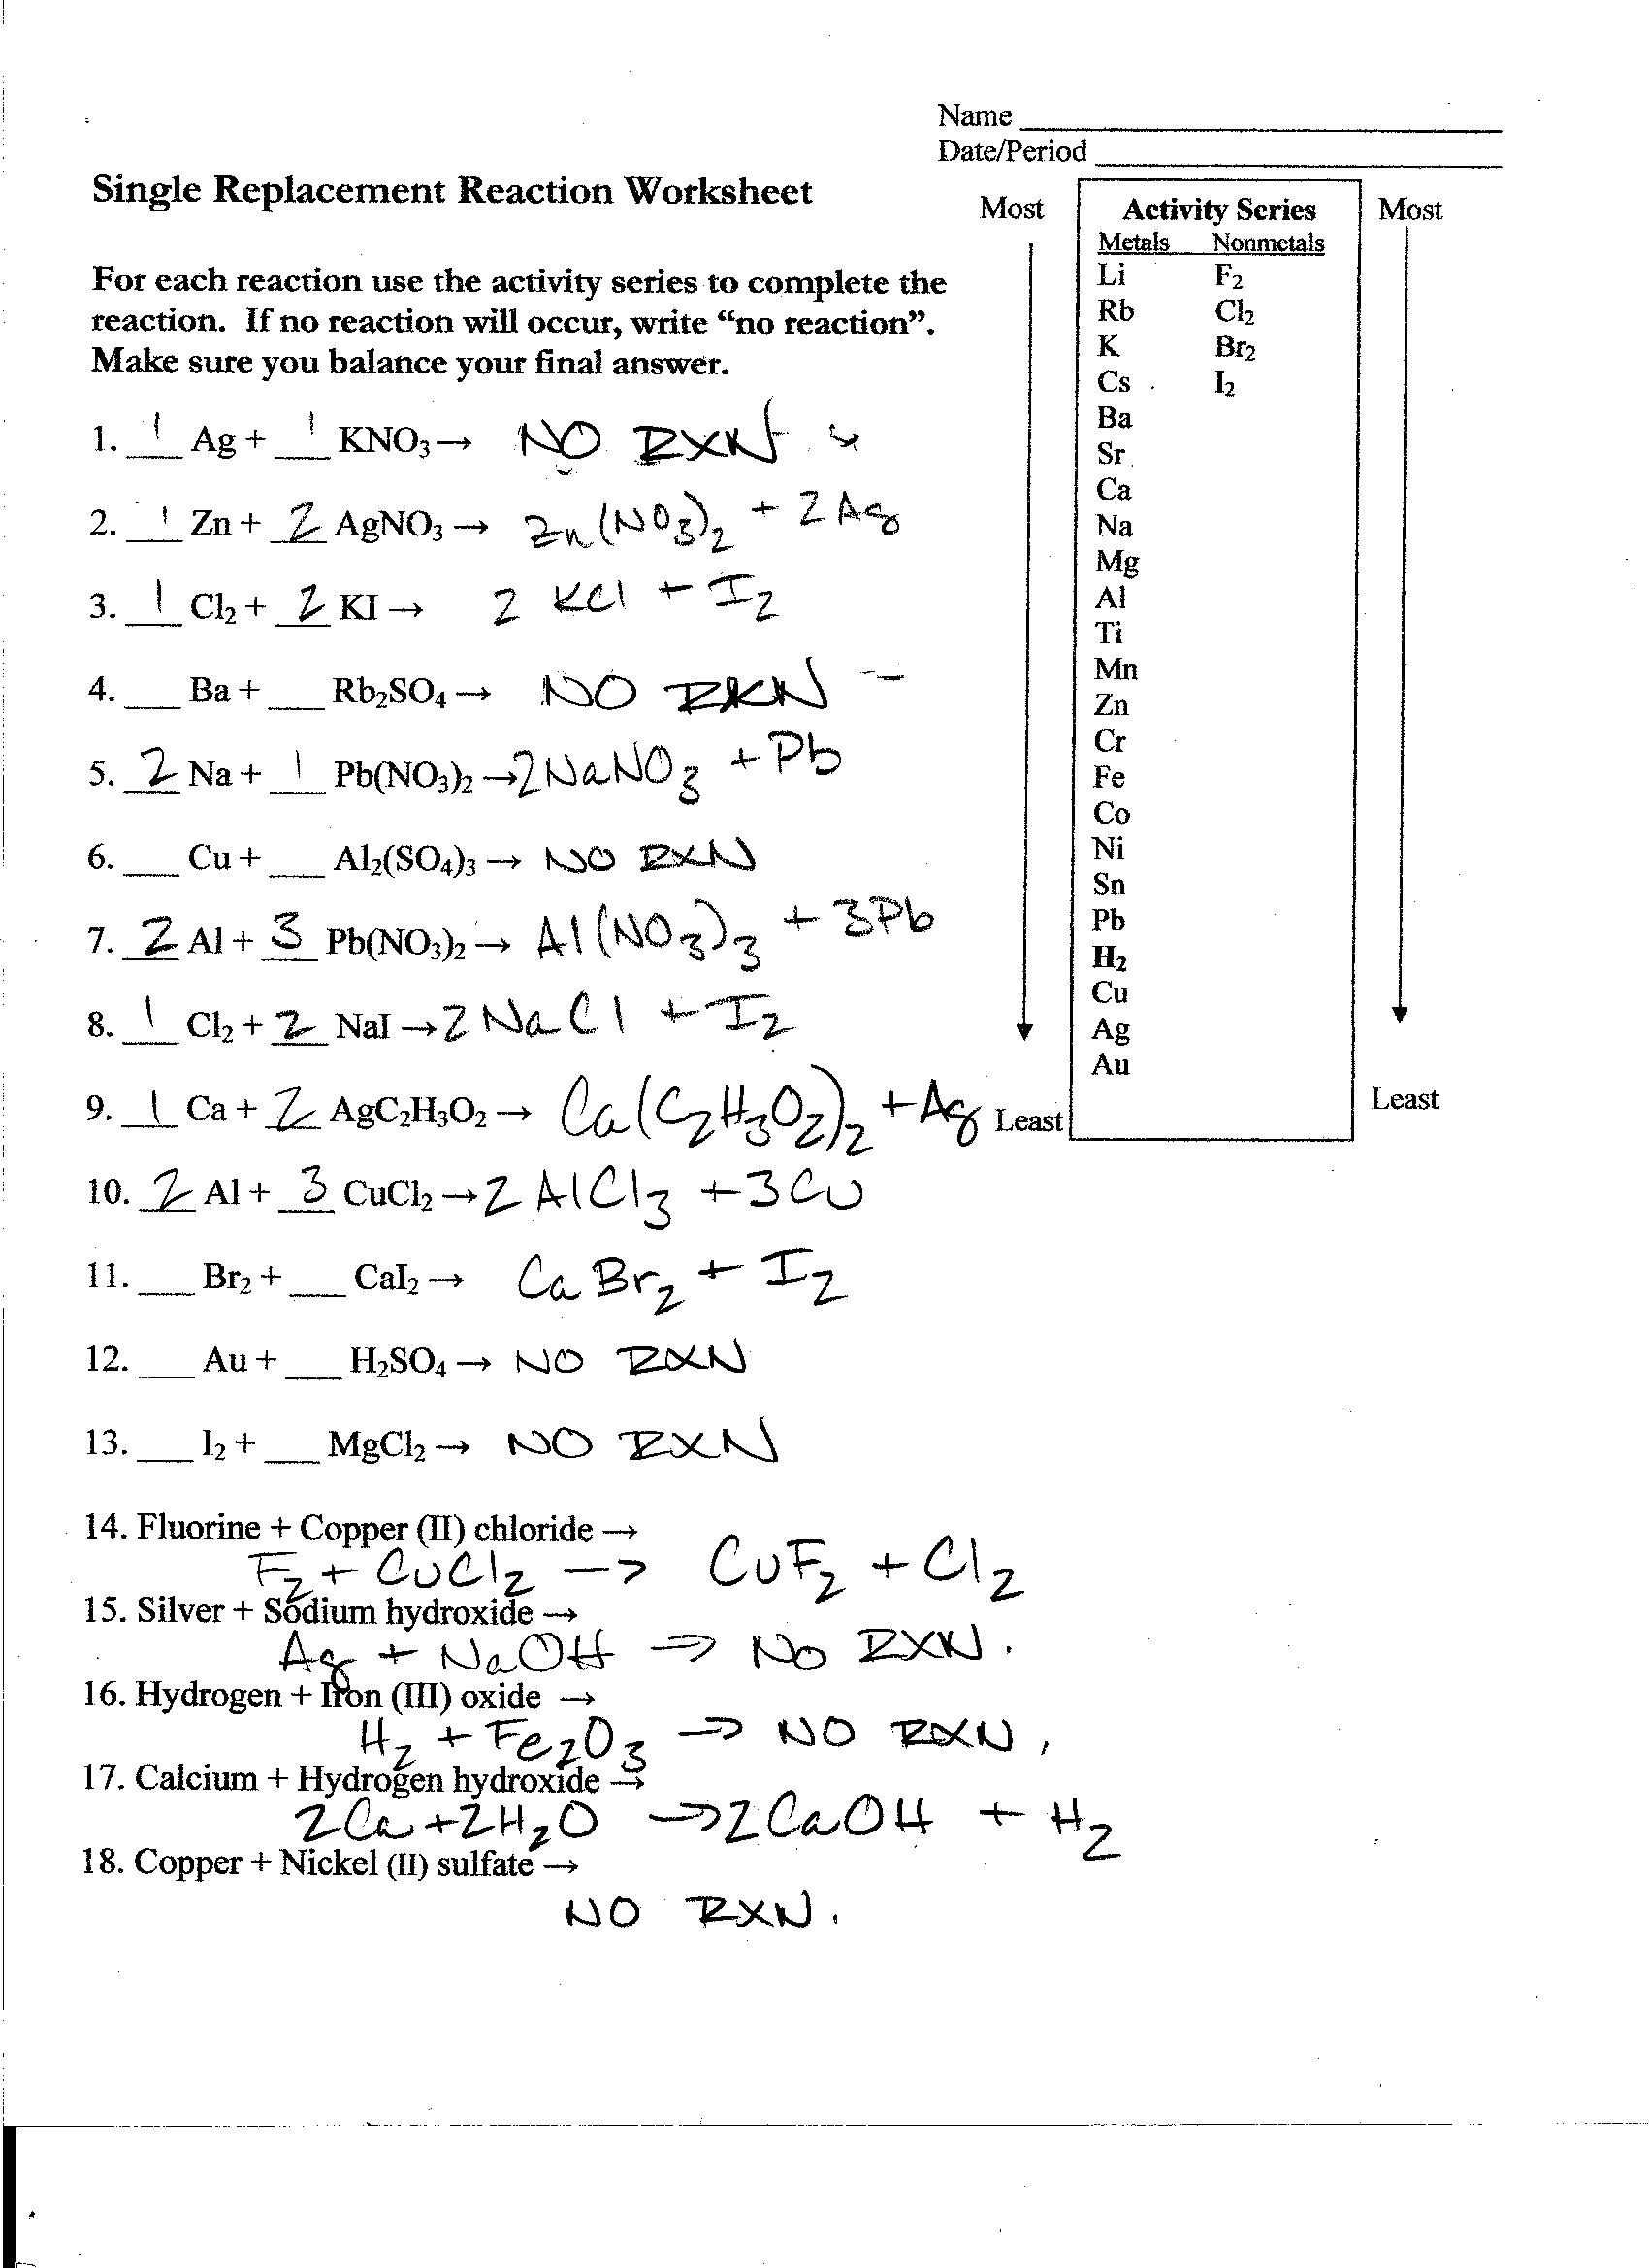 Neutralization Reactions Worksheet with Predicting Products Single Replacement Reactions Worksheet Image